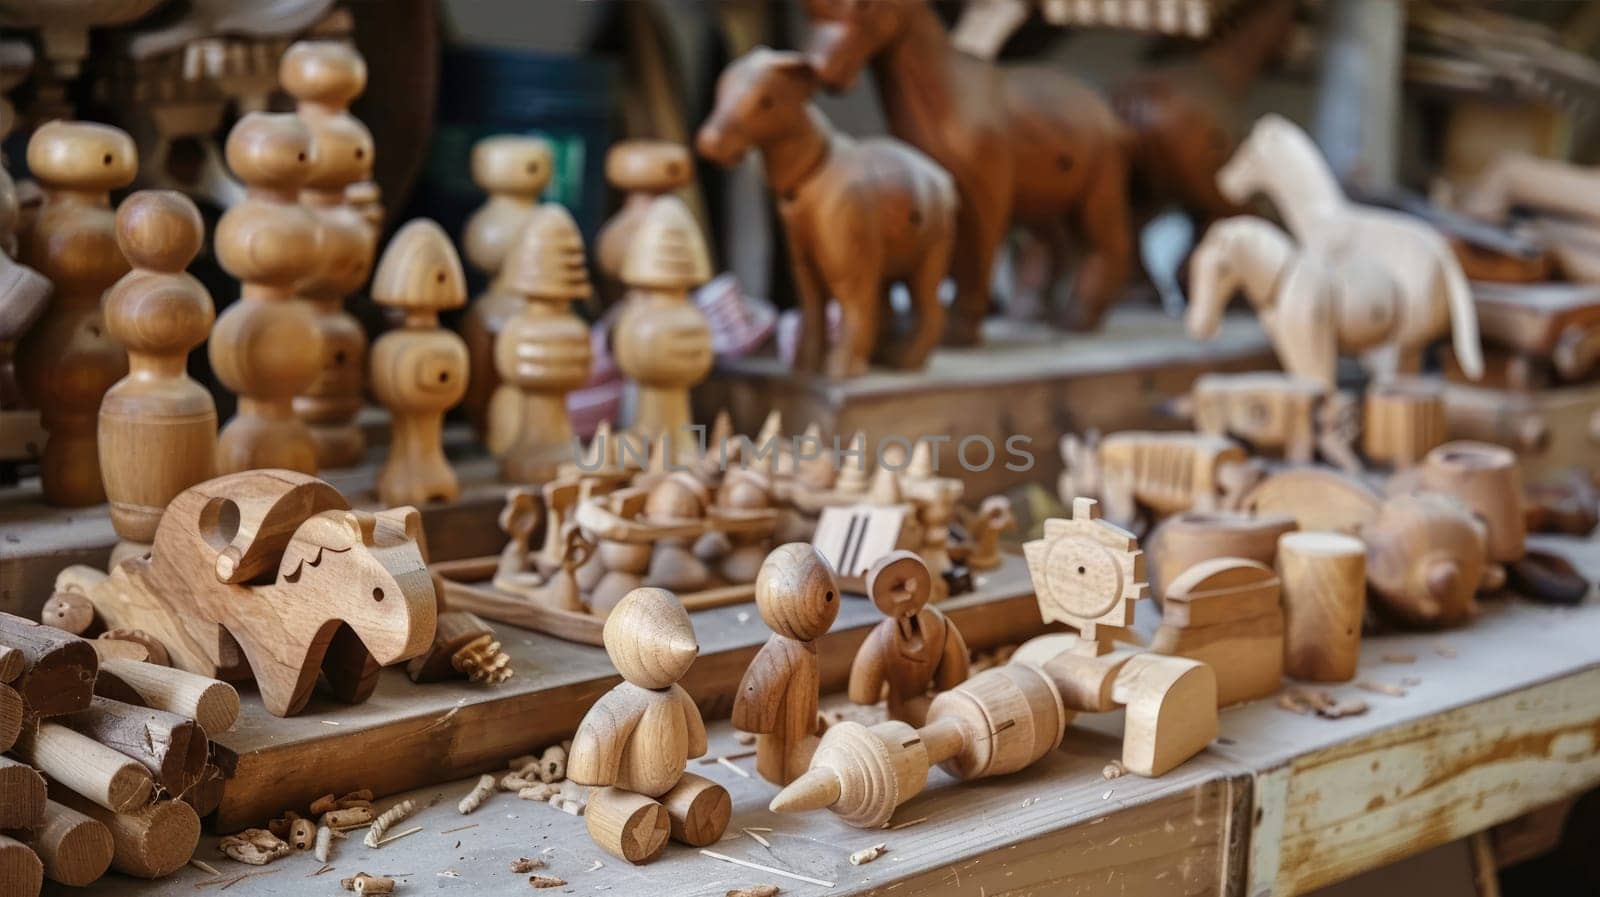 A table filled with wooden elements for toys by natali_brill